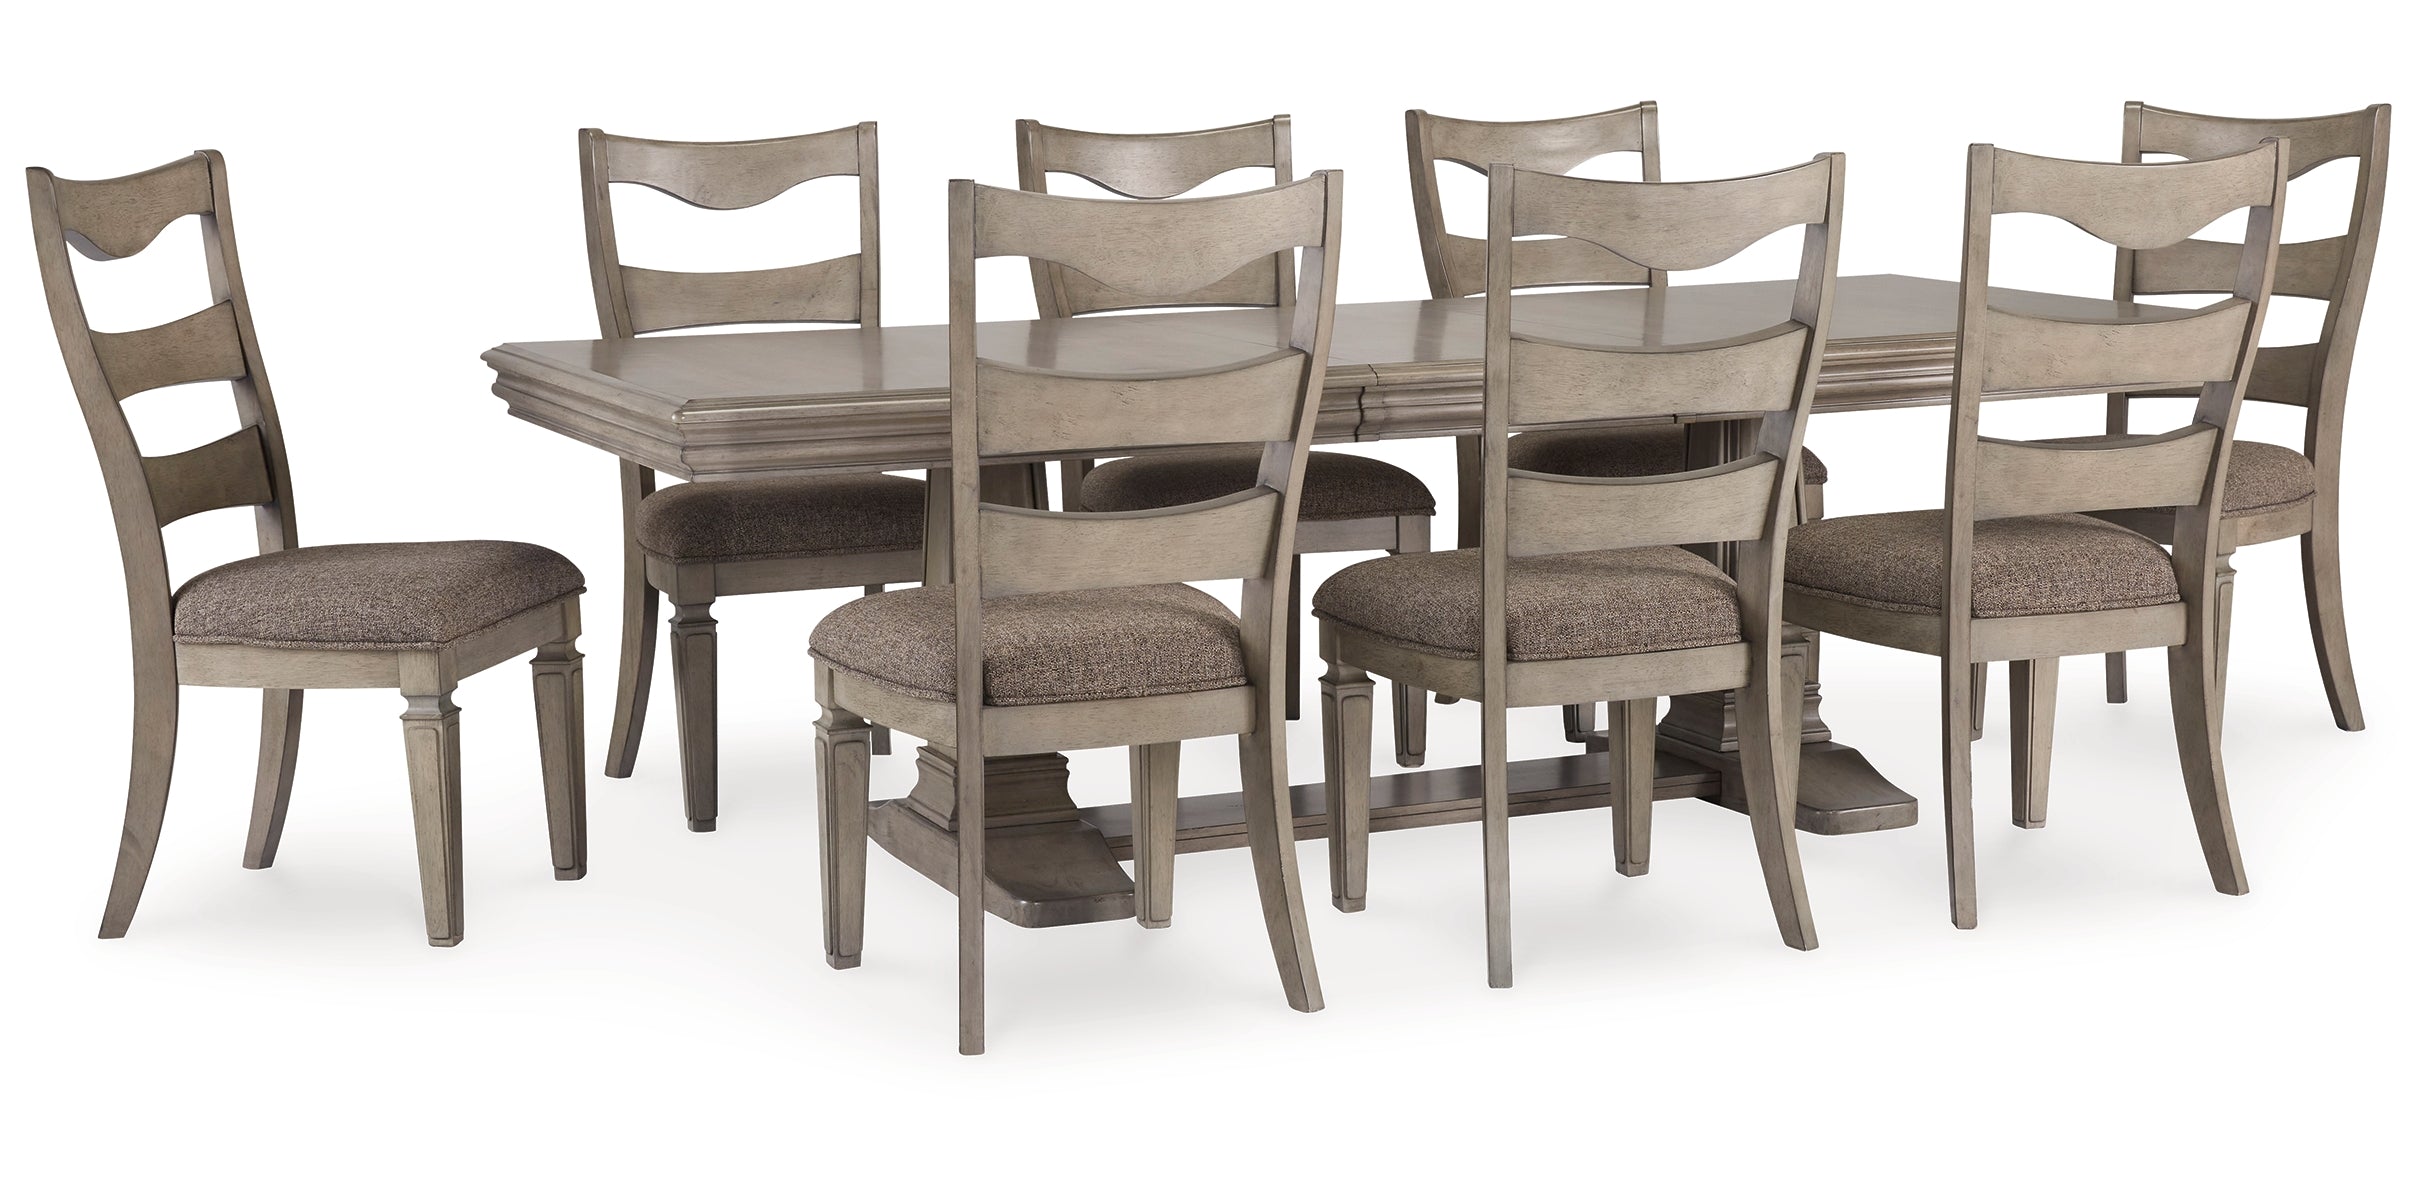 Lexorne Dining Table and 8 Chairs